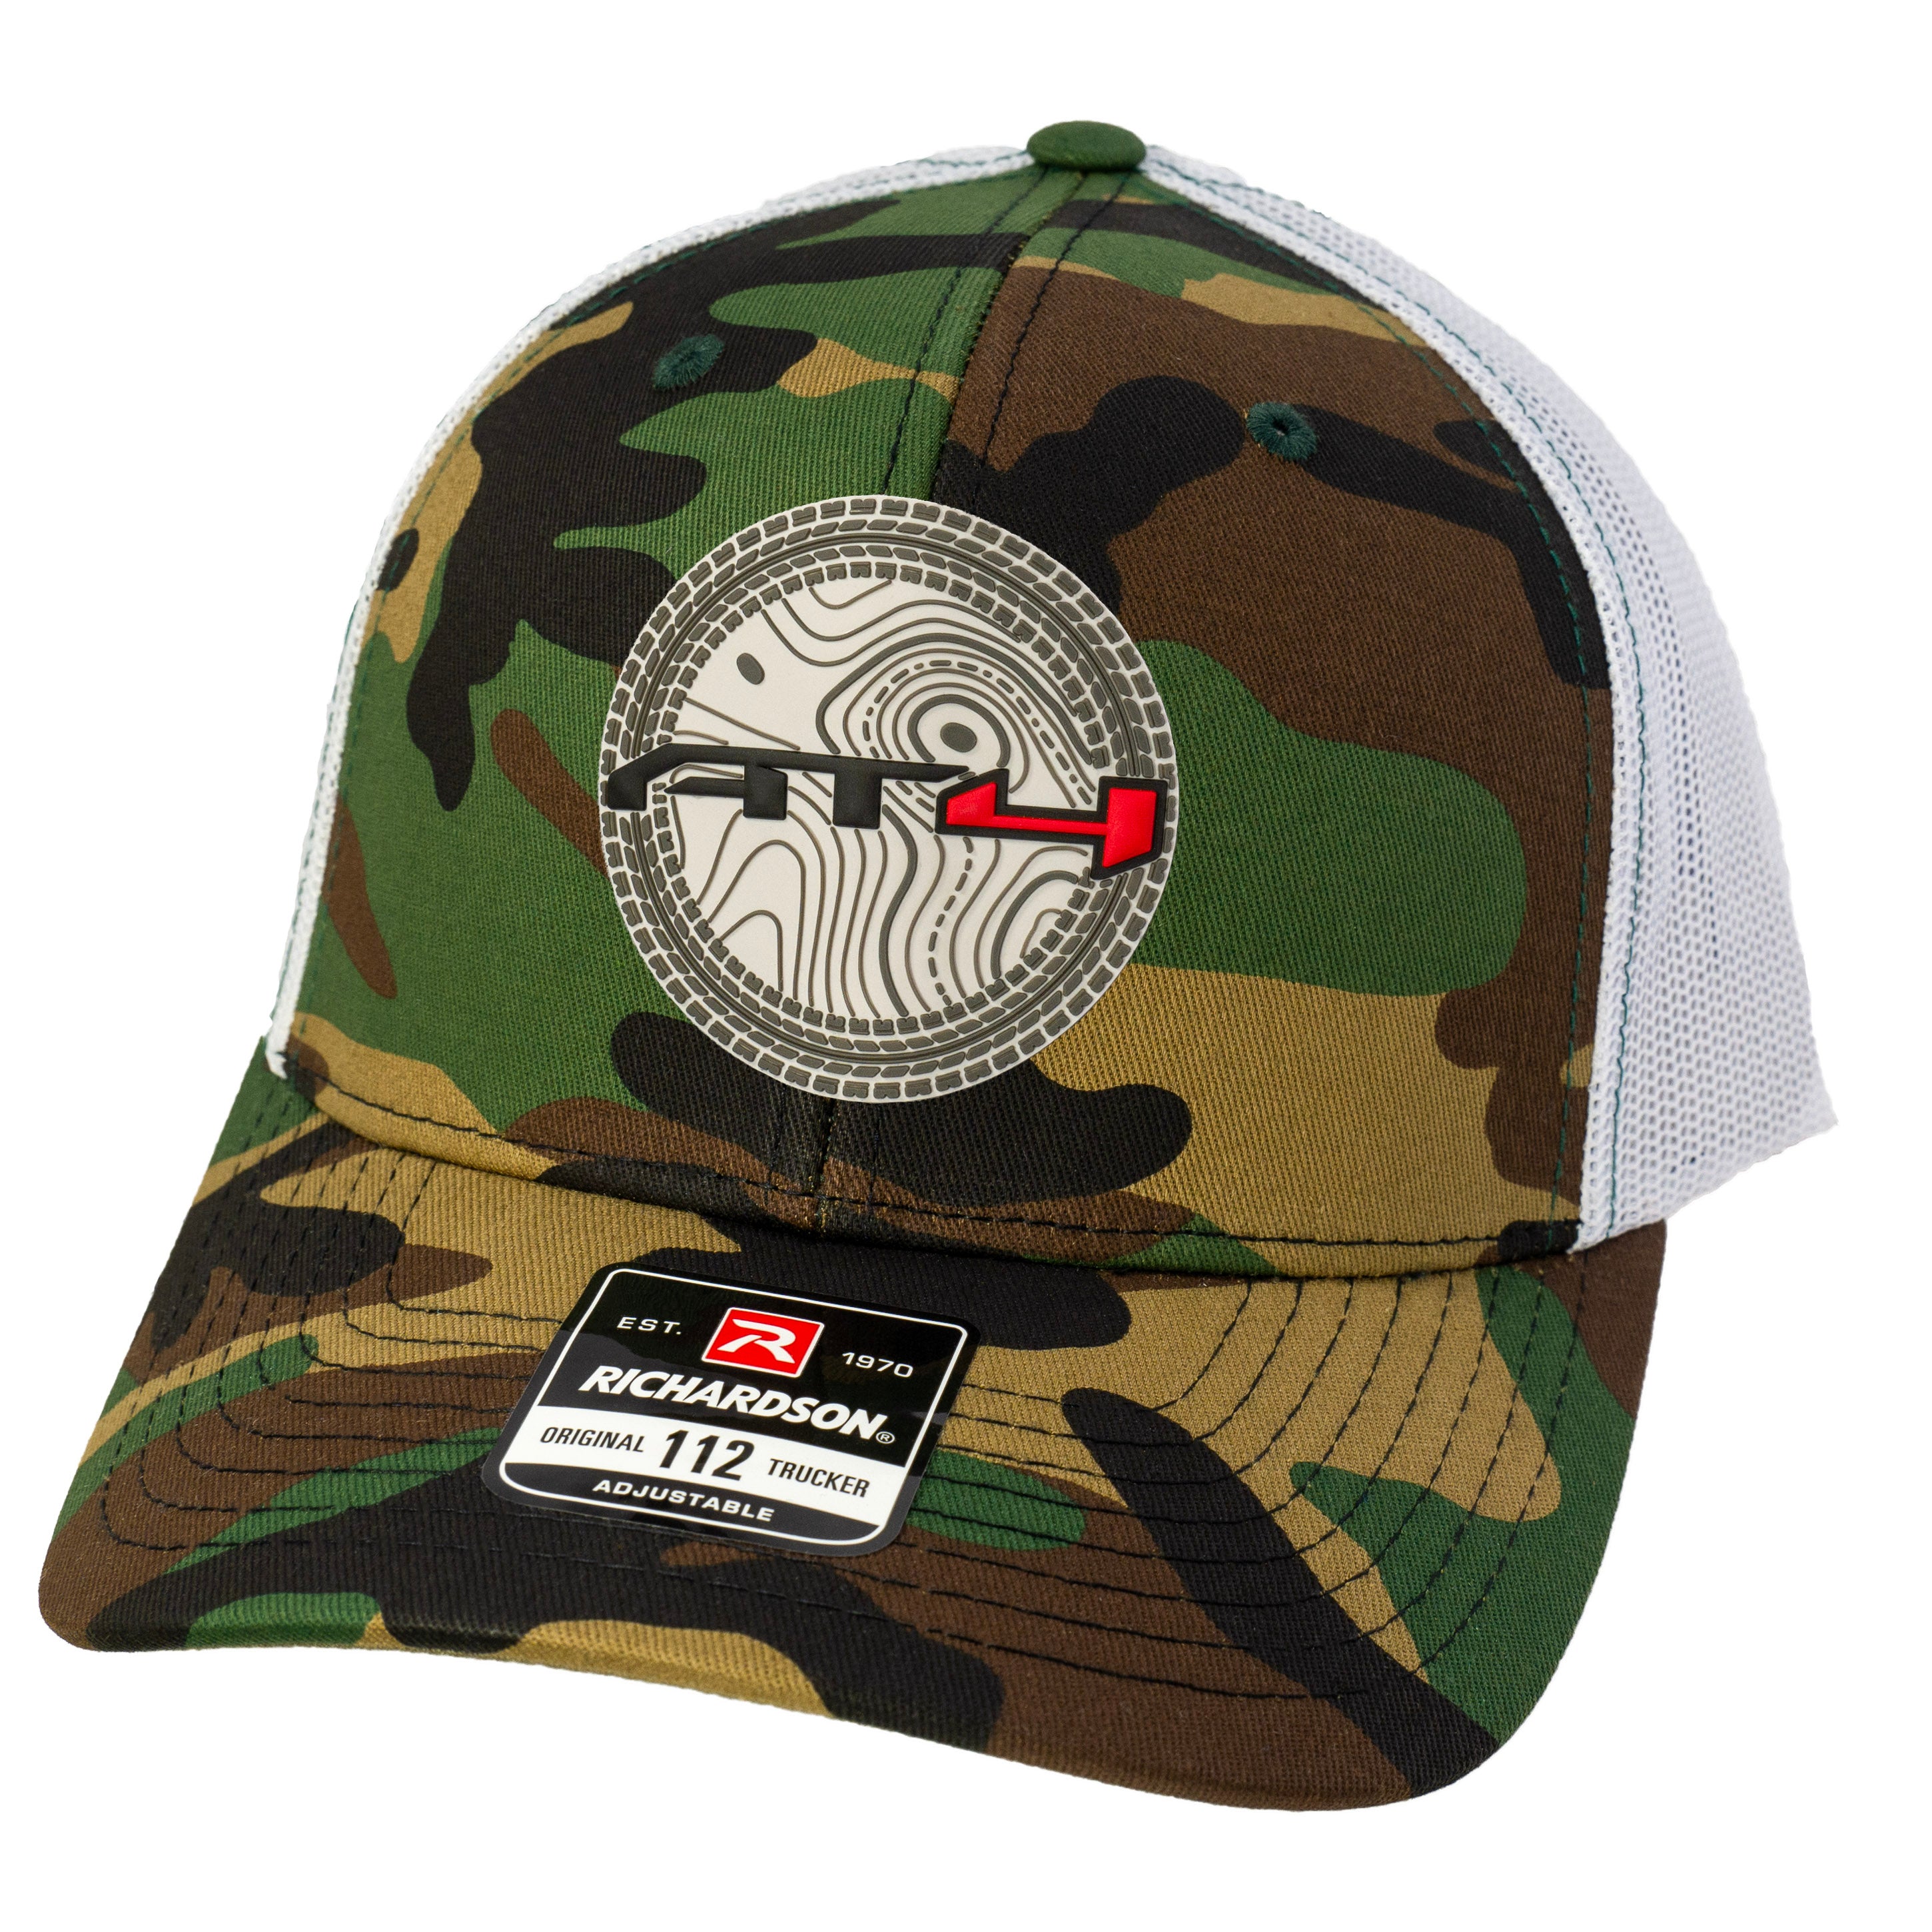 AT4 3D Patterned Snapback Trucker Hat- Army Camo/ White